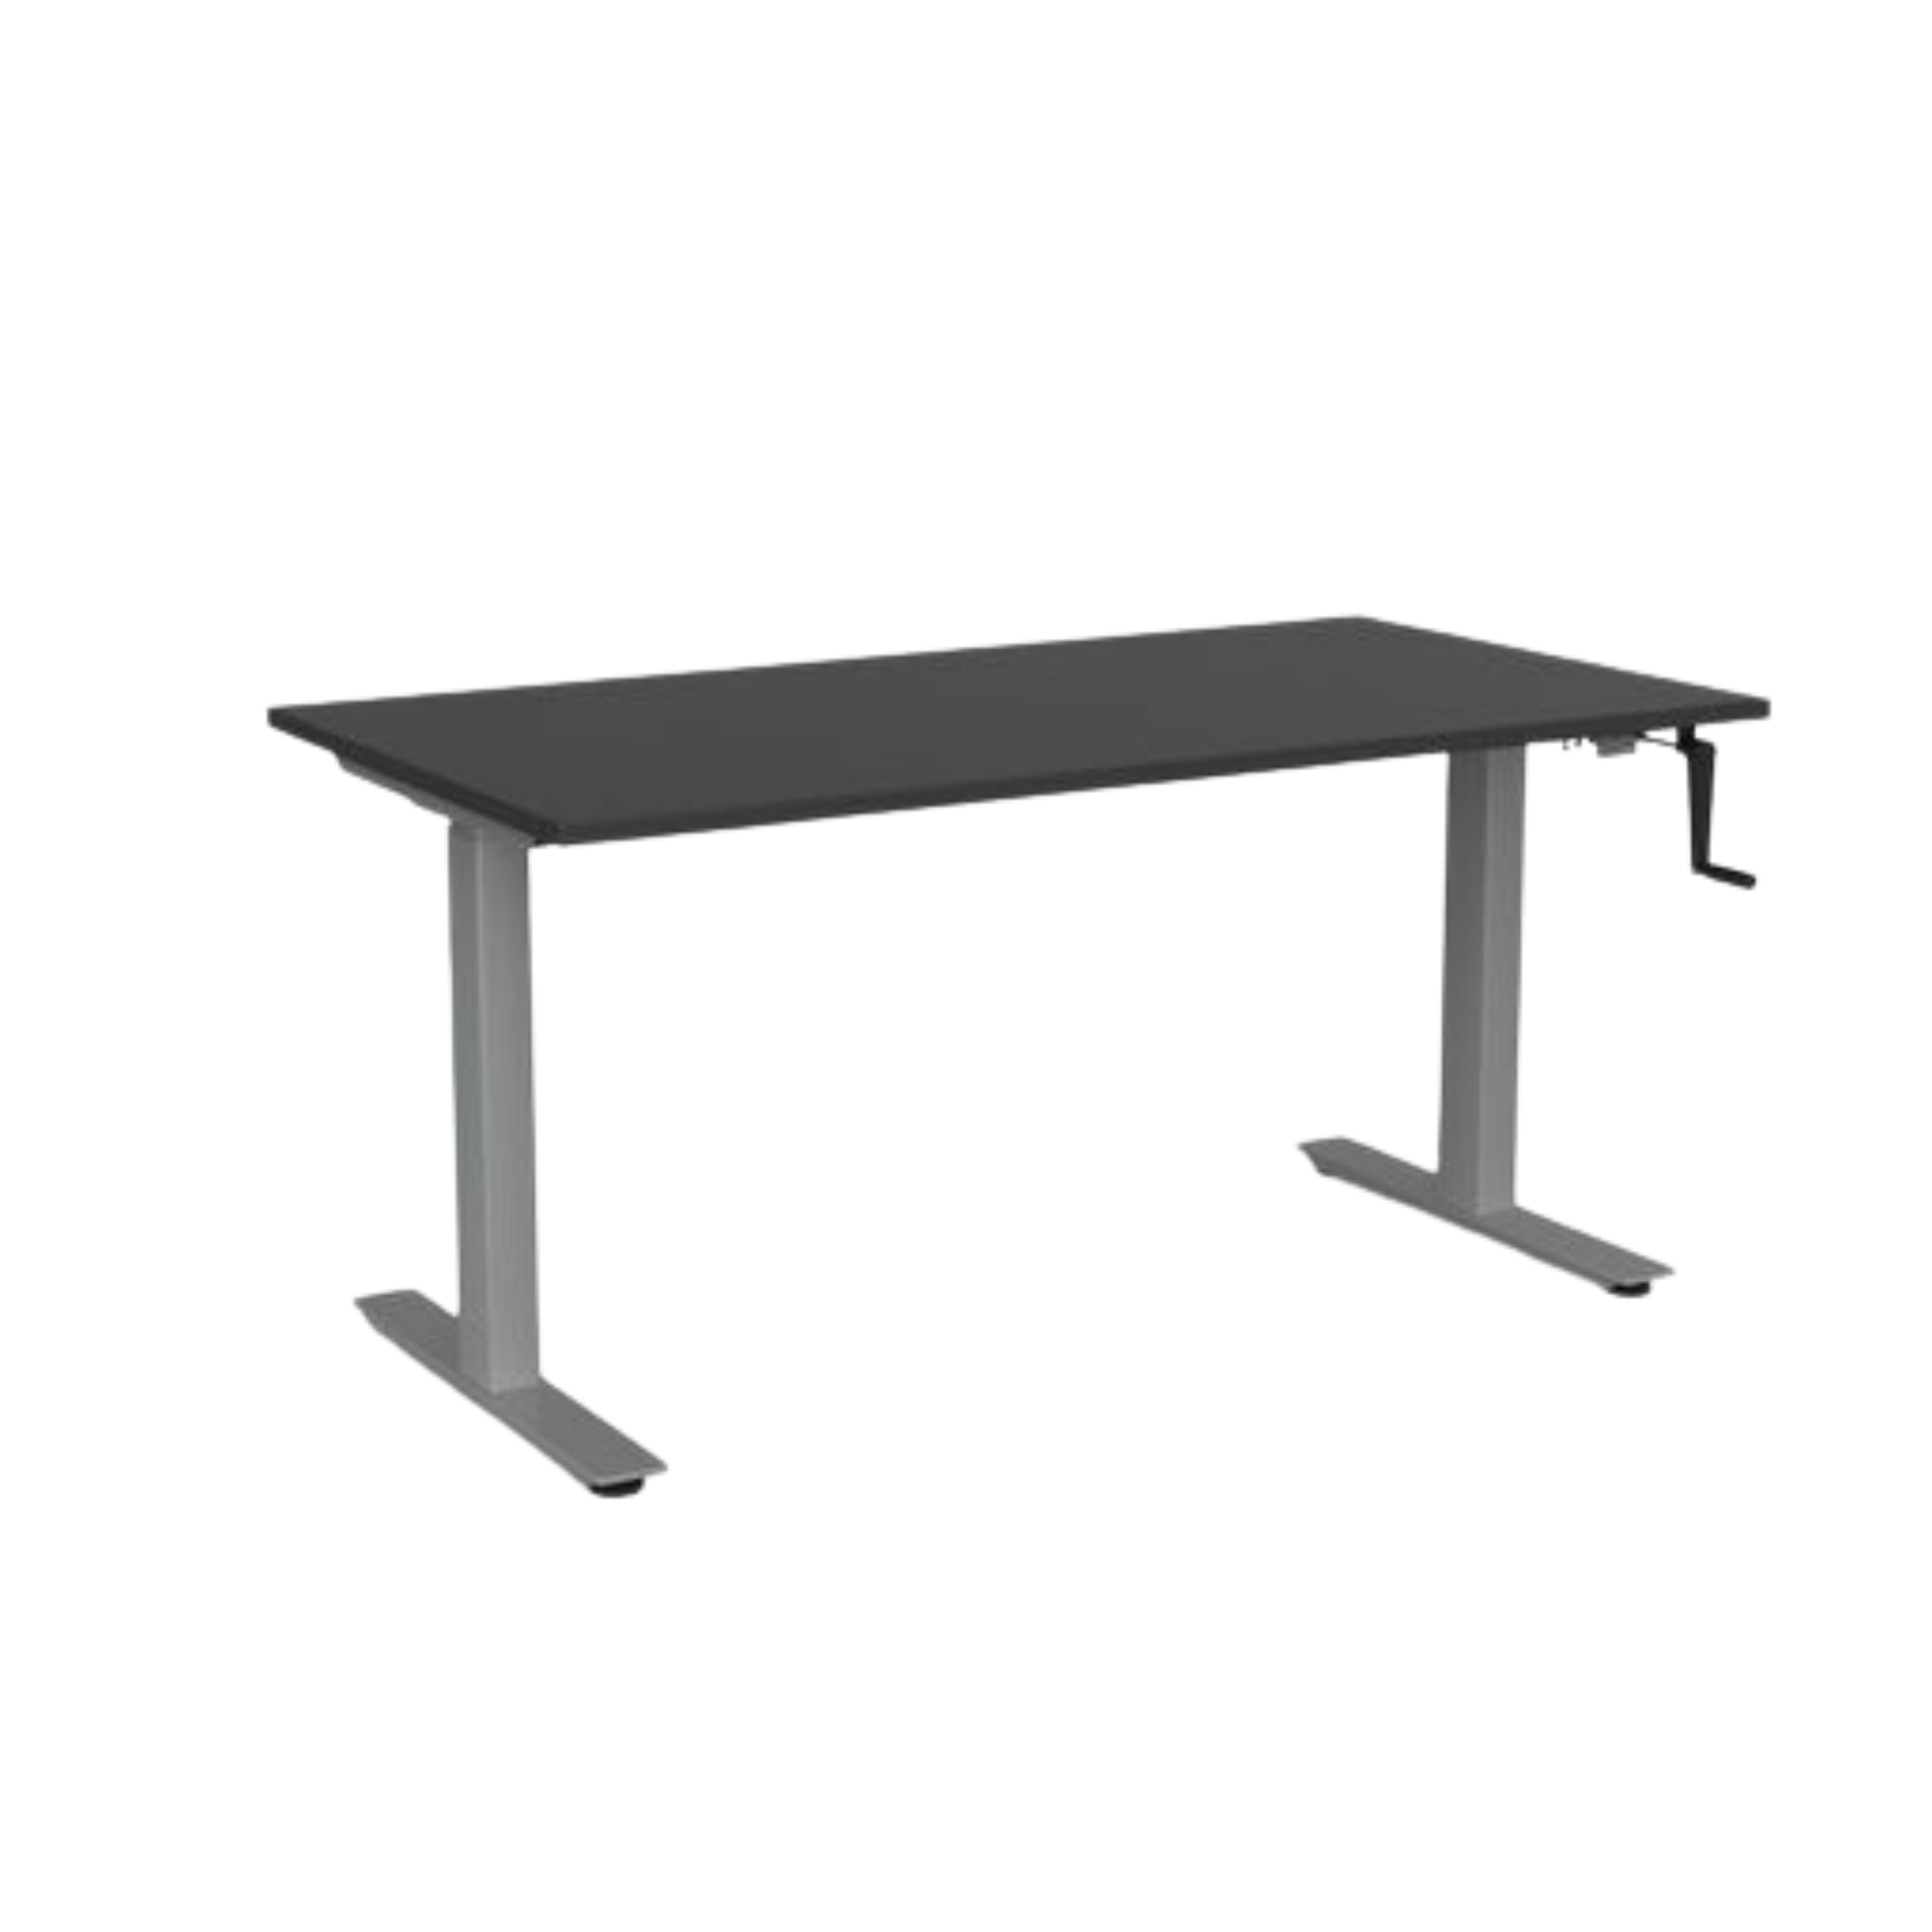 Agile winder sit to stand desk with silver frame and black top